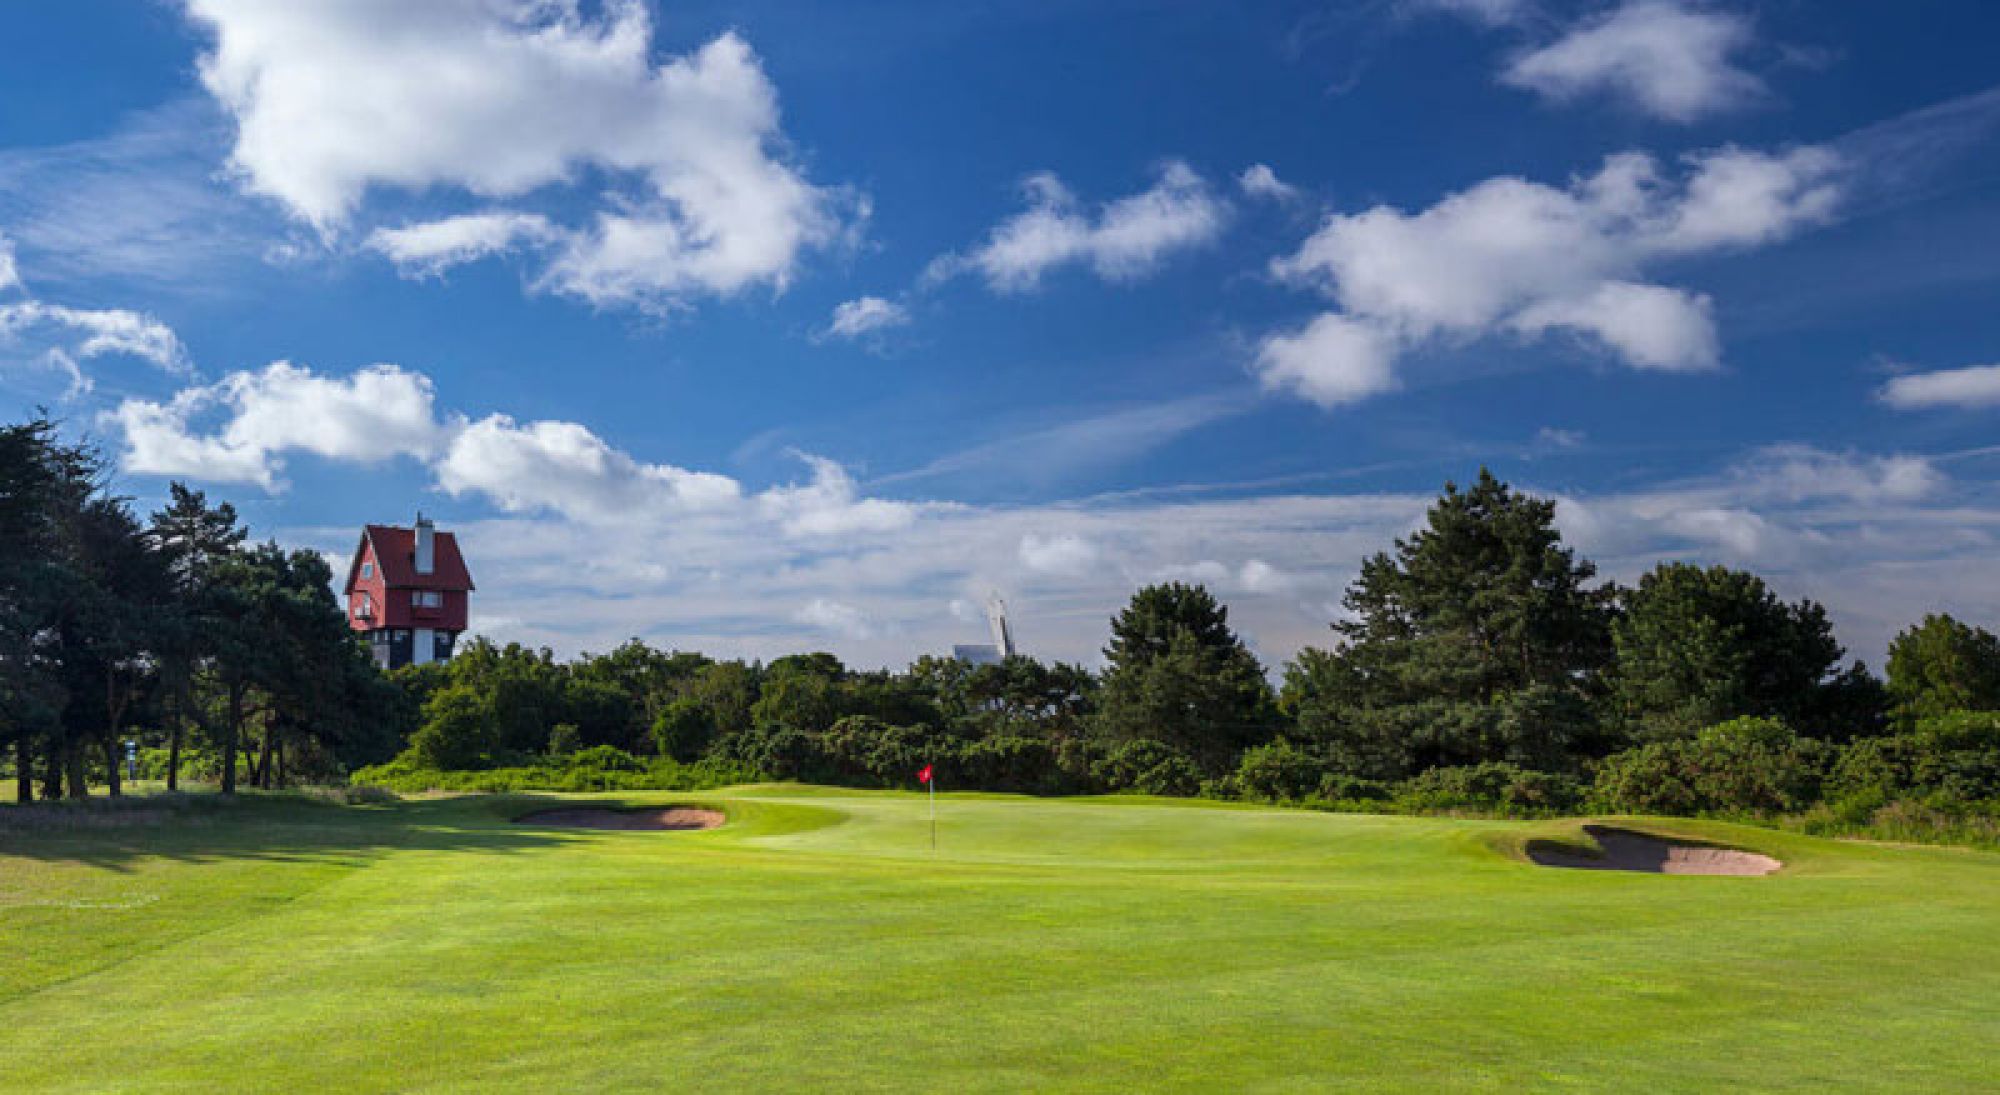 The Thorpeness Golf Club's impressive golf course within brilliant Suffolk.